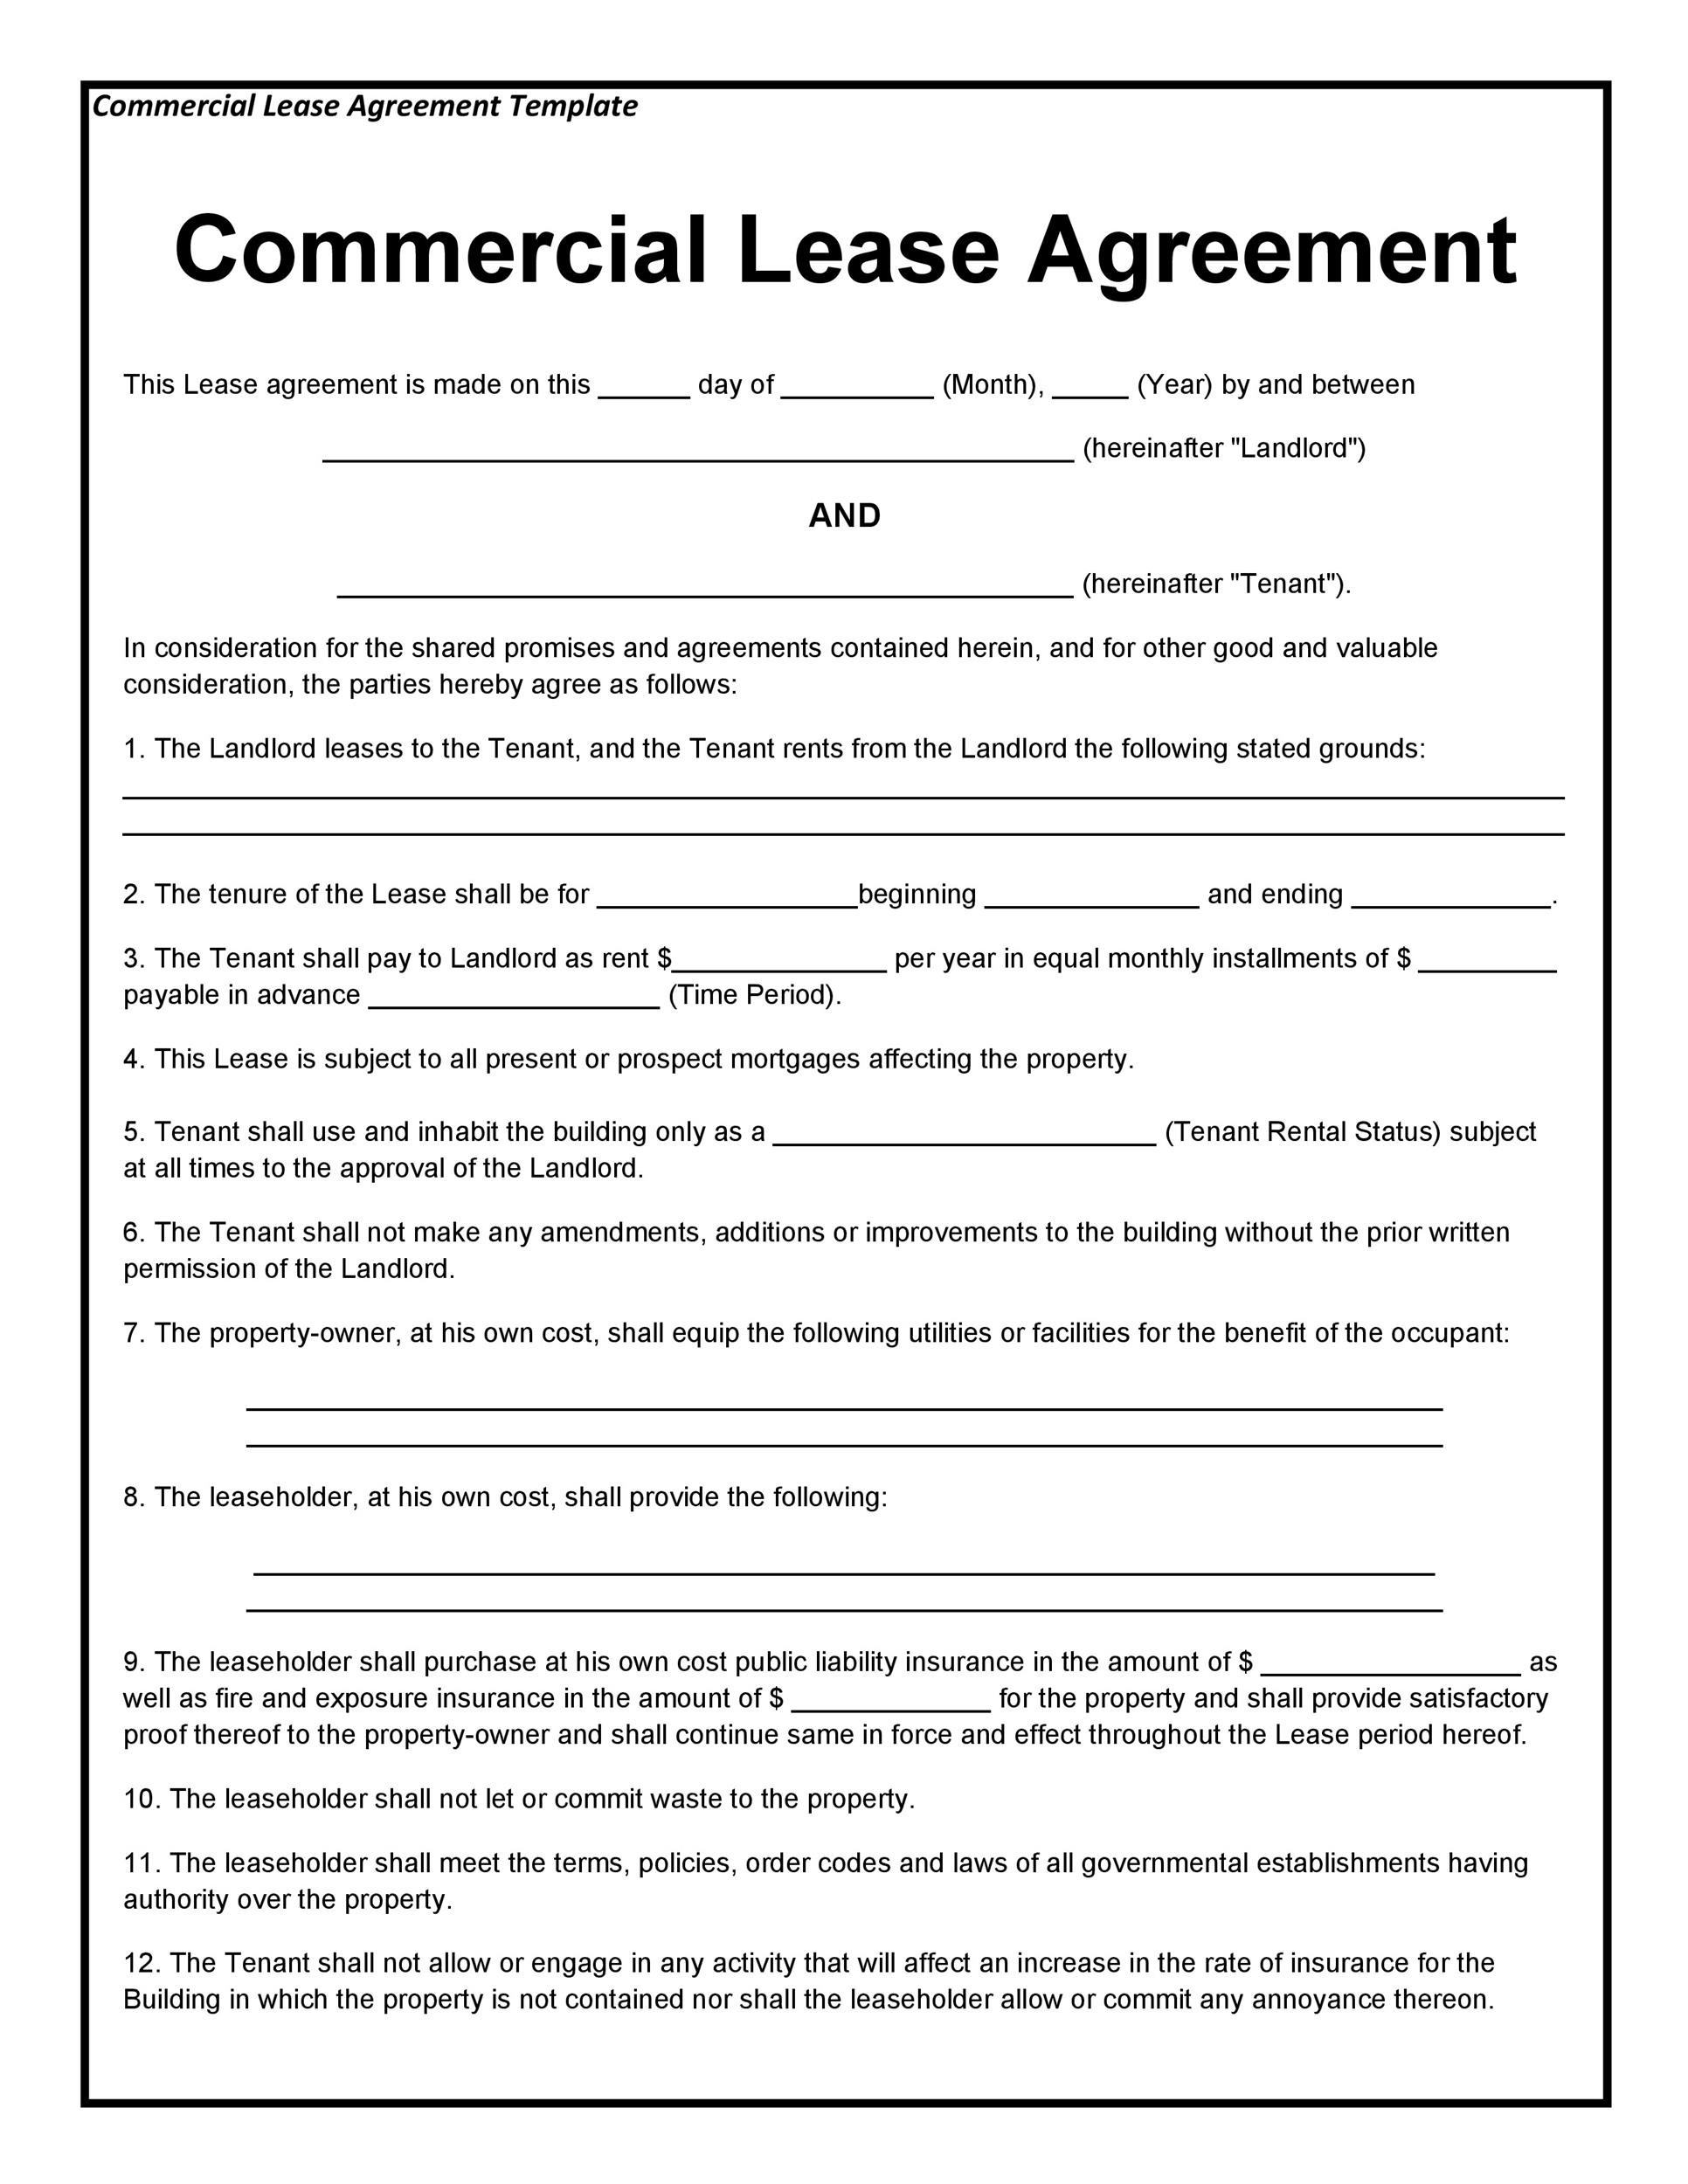 commercial leasing agreement